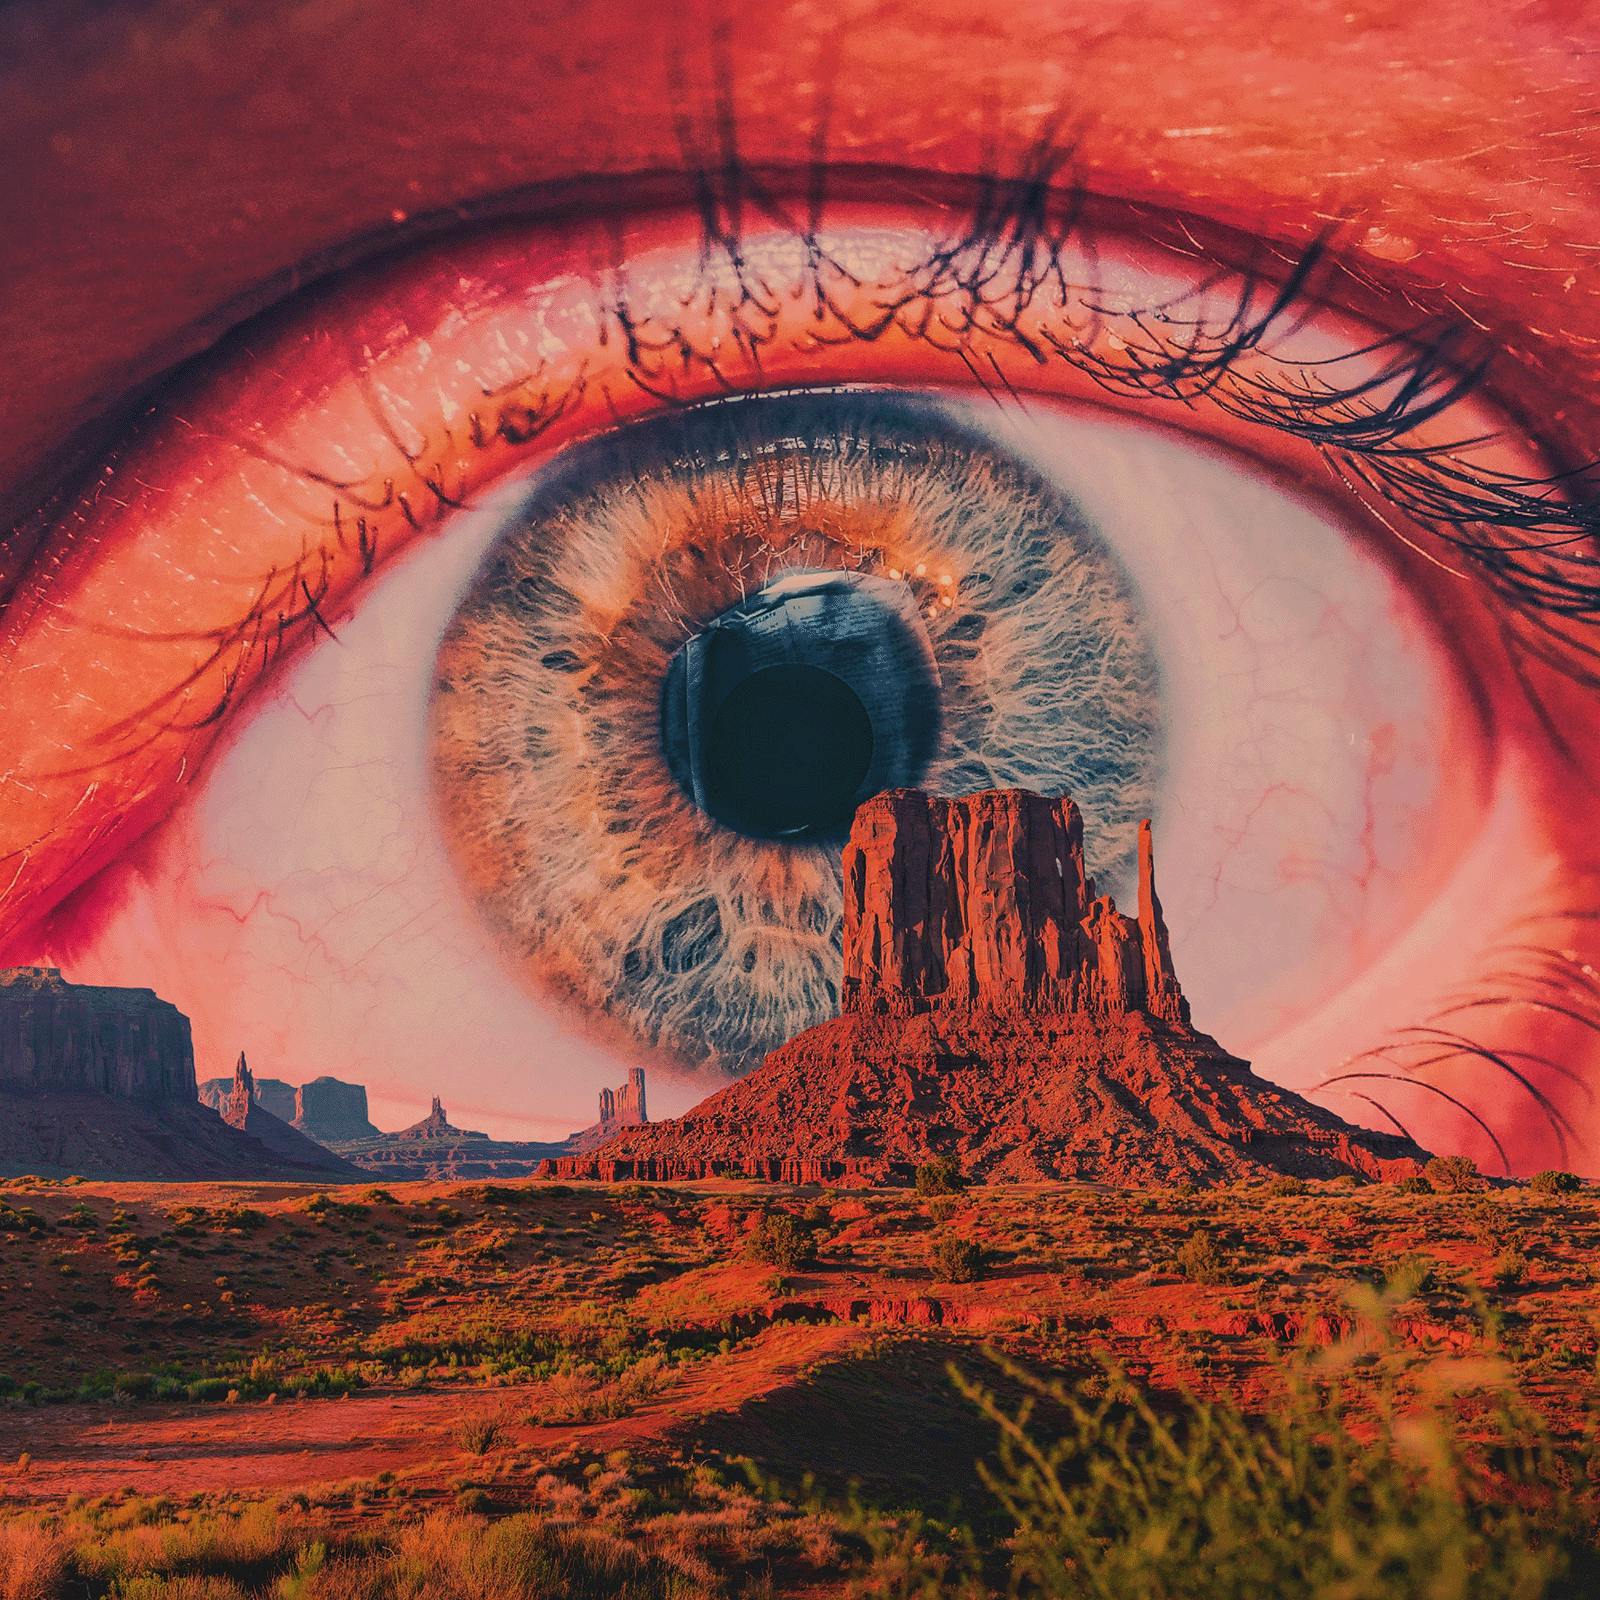 A collage of a giant eye looking an Monument Valley